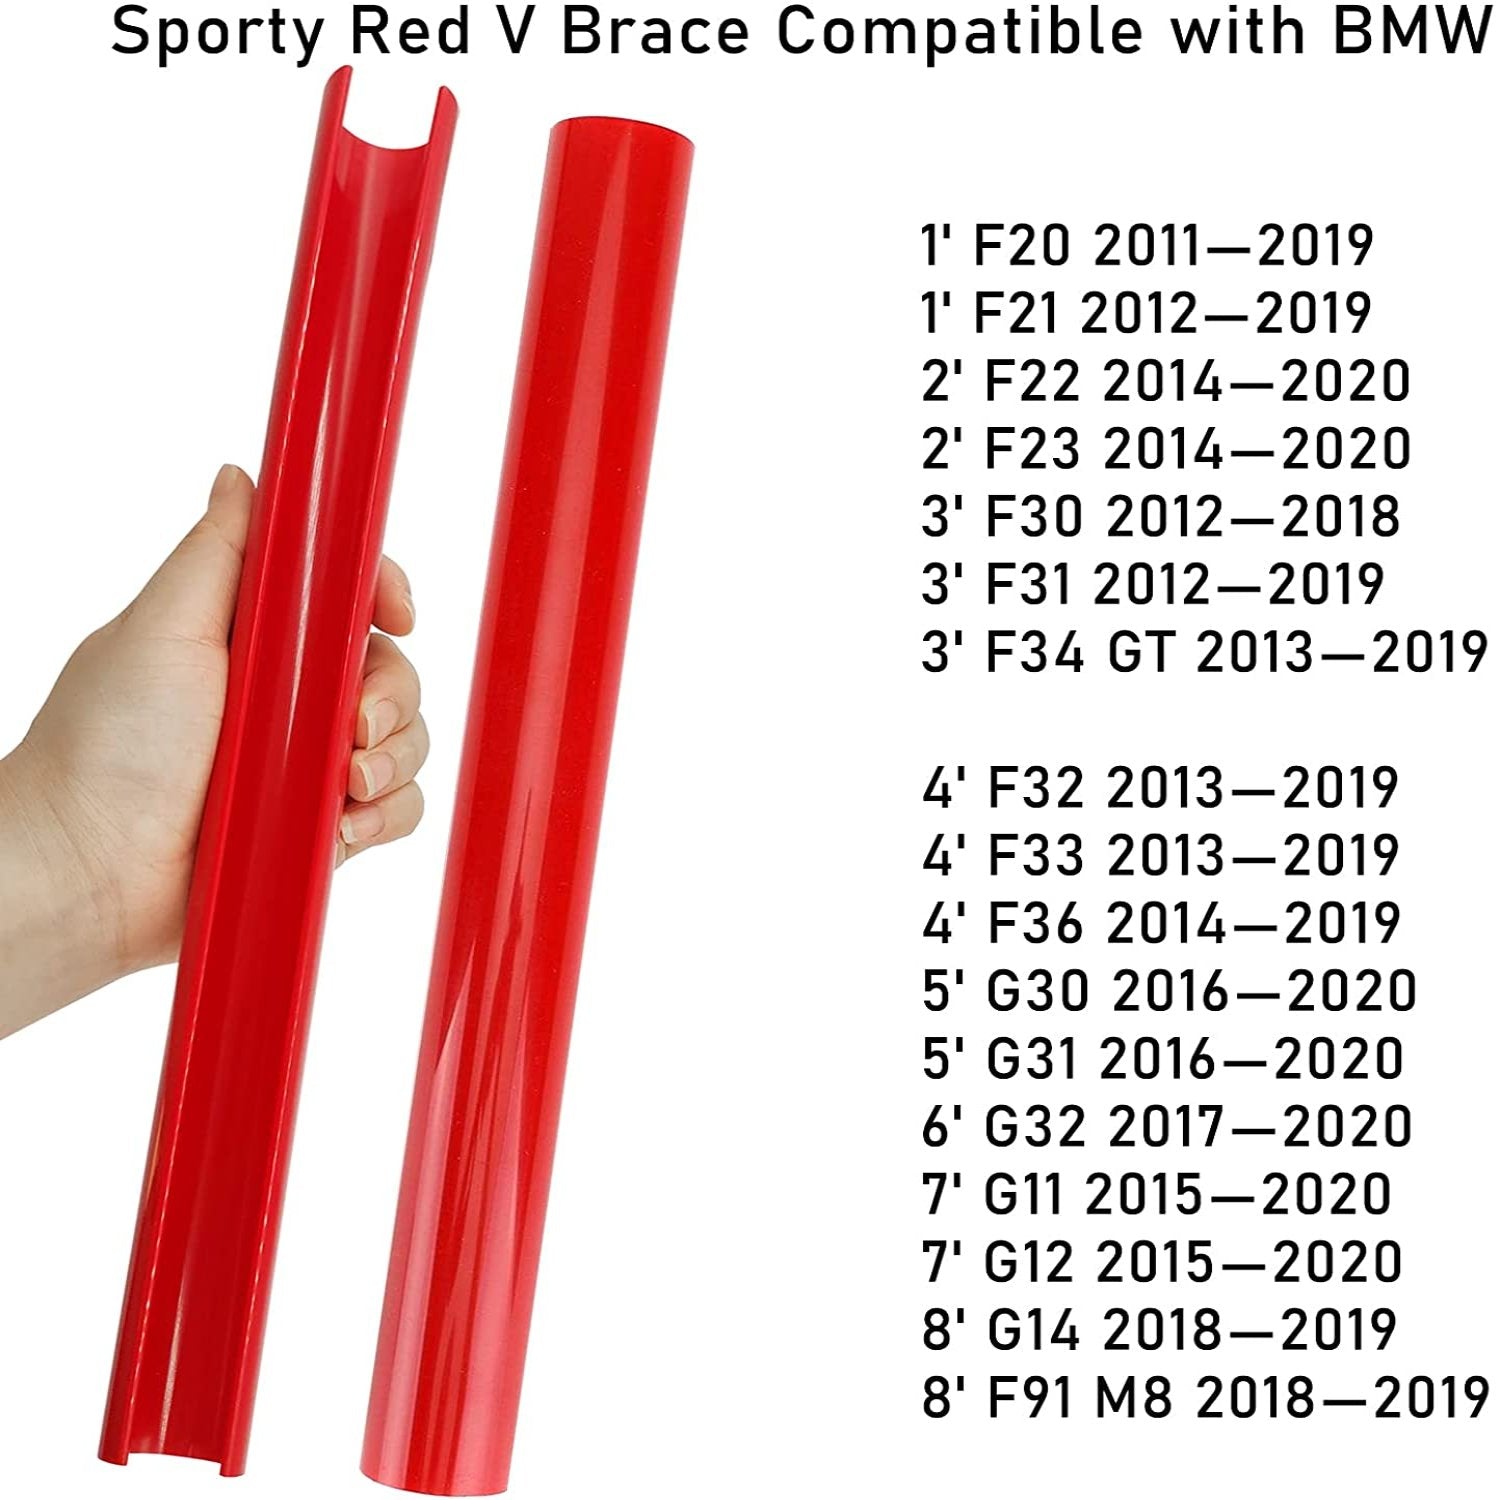 Jaronx Compatible with BMW Grill Inserts Trims for 1 2 3 4 5 6 7 Series,  F20 F22 F30 F32 G30 G32 G11 G12, Compatible with BMW V Brace Wrap Covers  Red